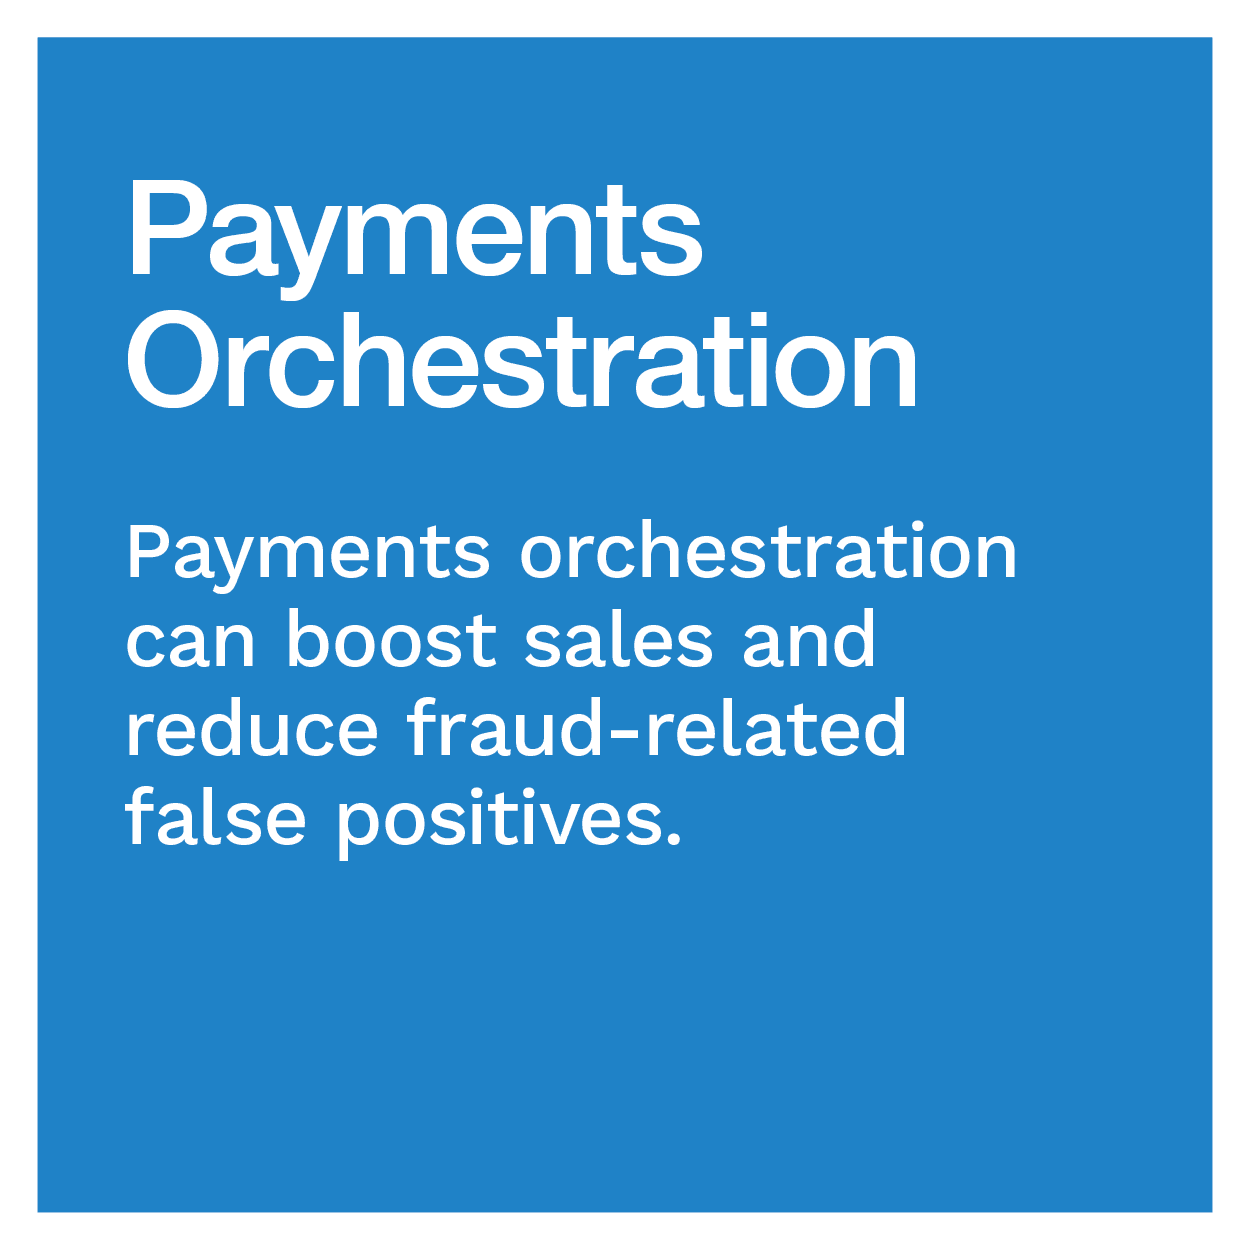 Payments Orchestration: Payments orchestration can boost sales and reduce fraud-related false positives.